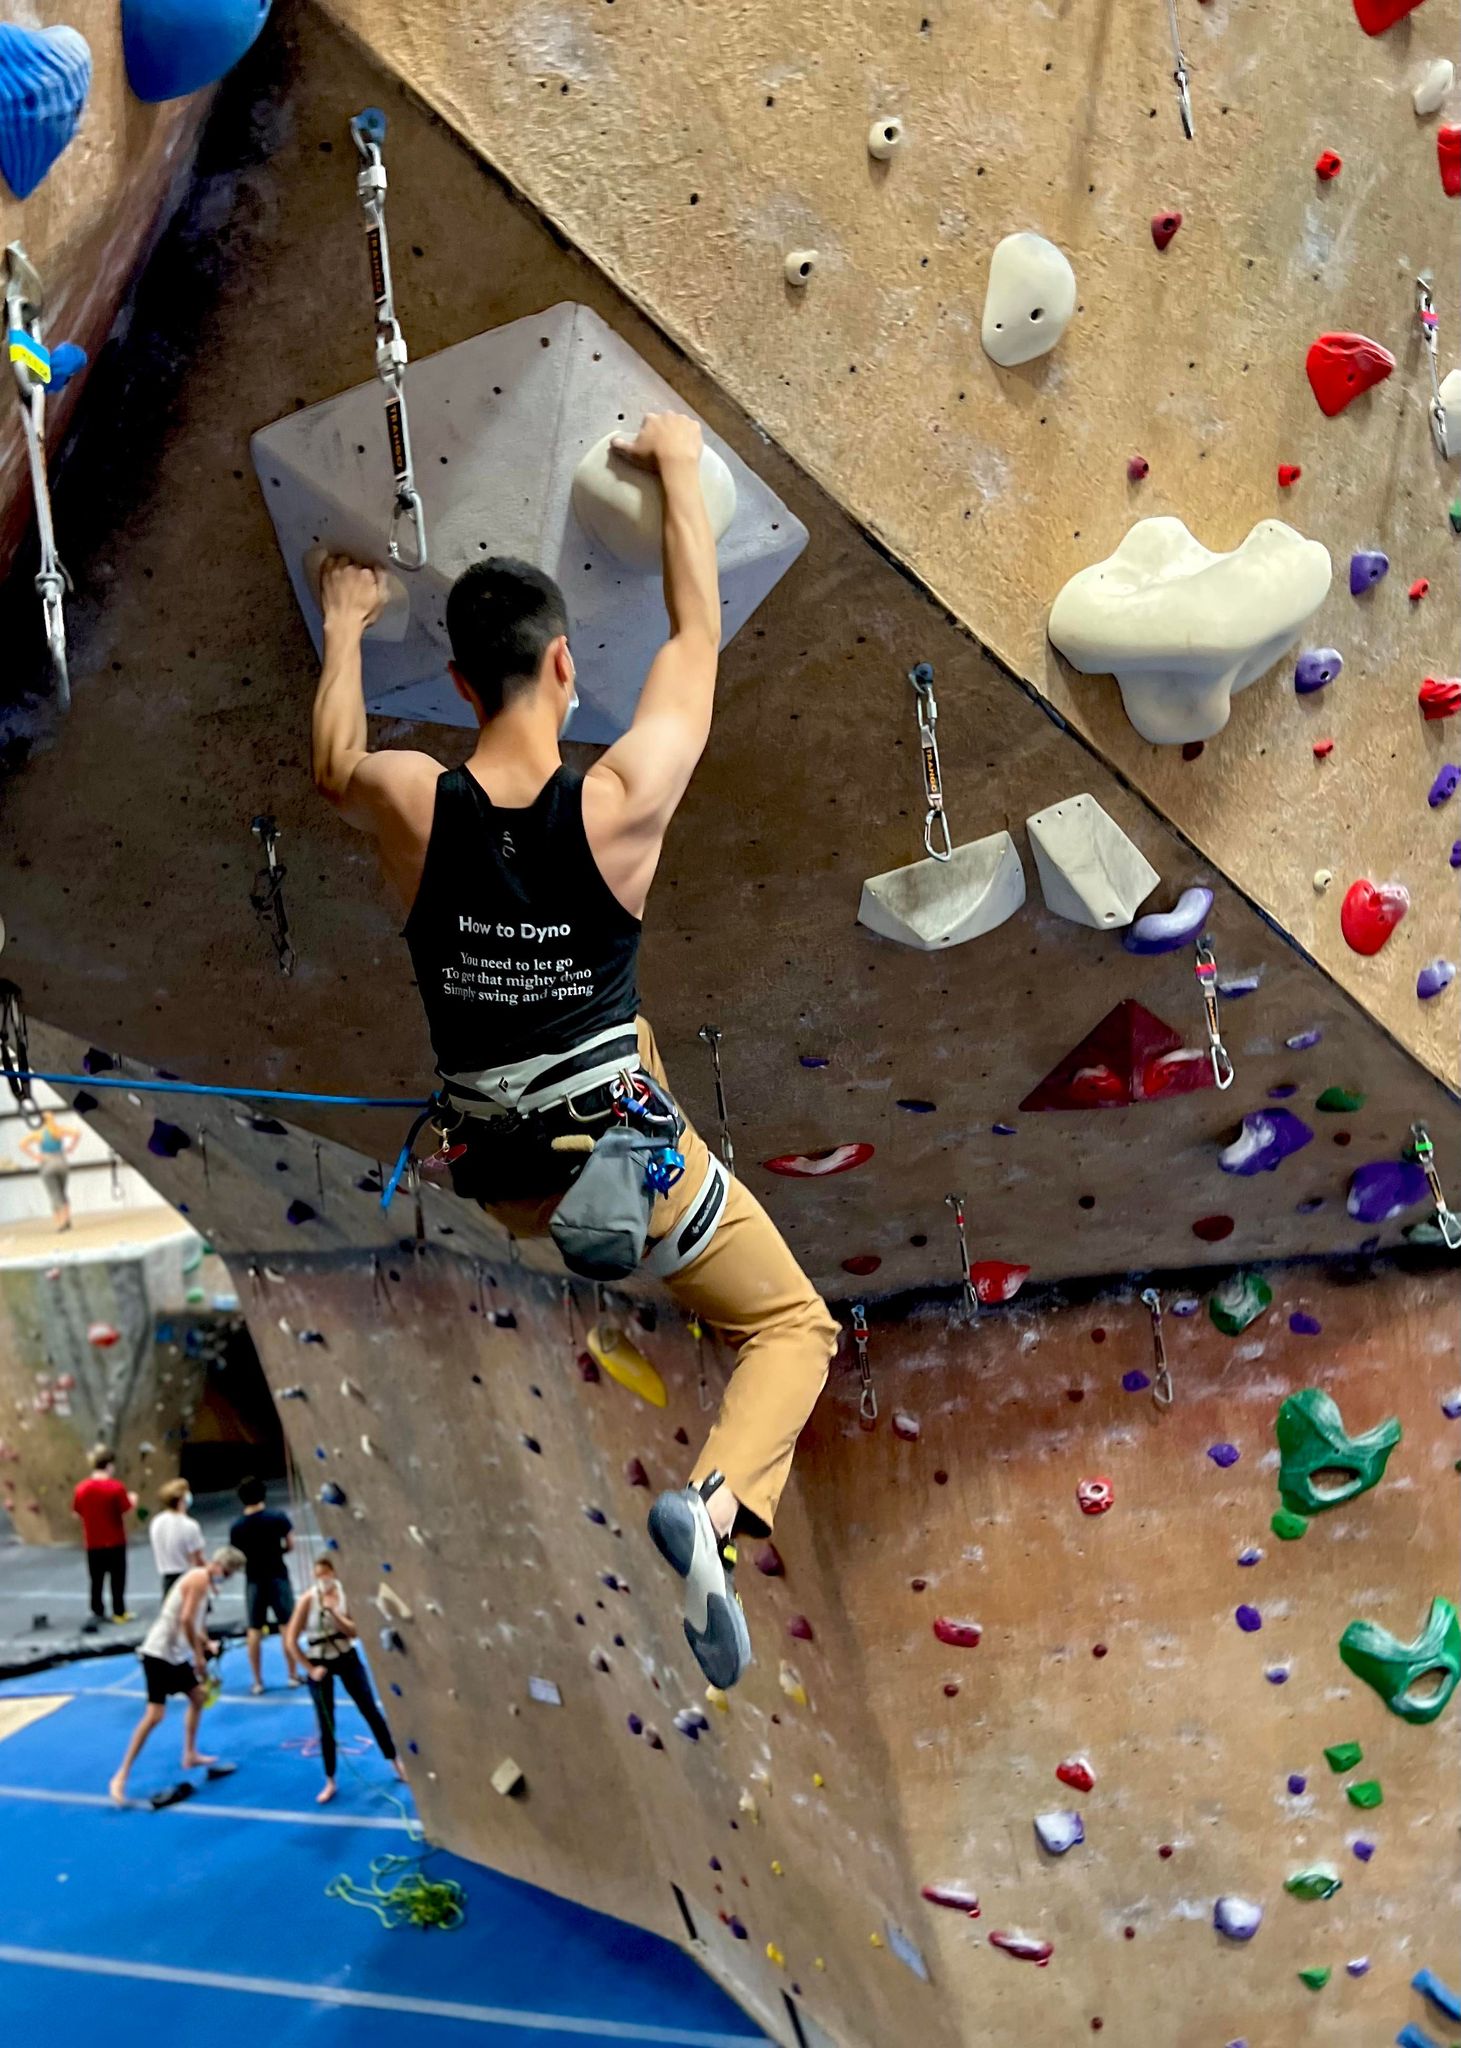 Charcoal black tank top shirt with How to Dyno haiku on the back worn by male lead climbing on a climbing wall in the gym